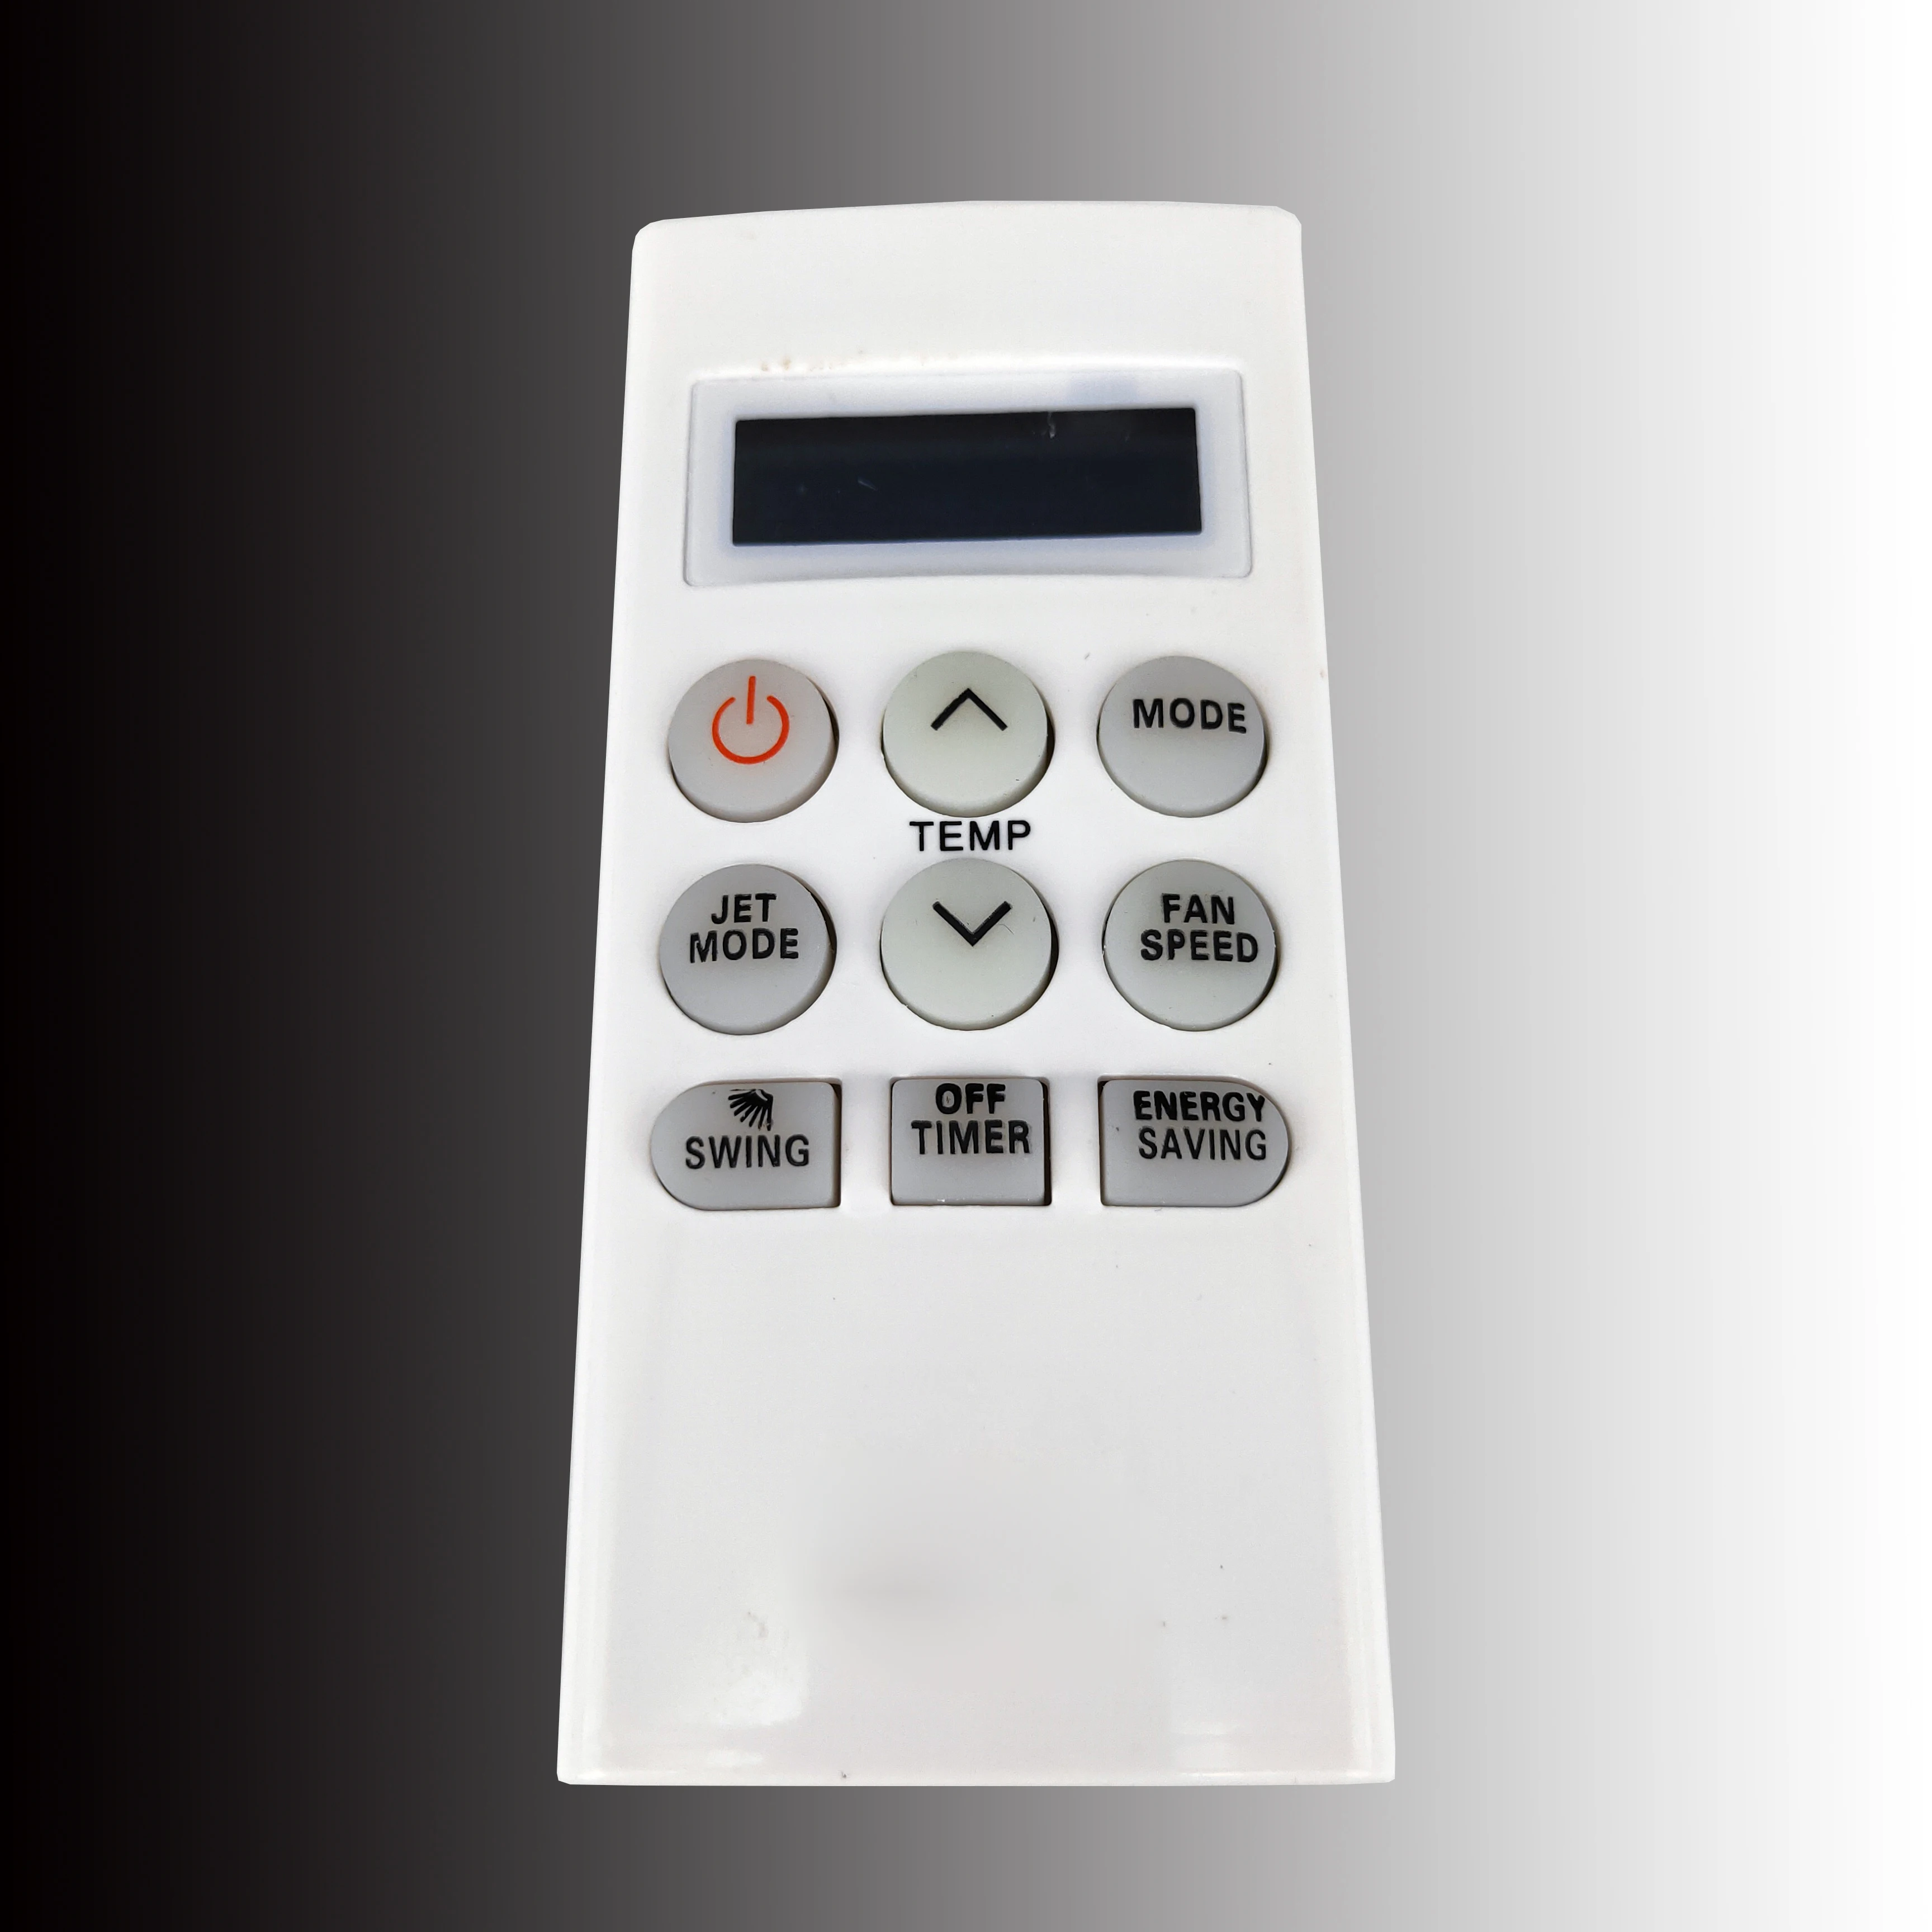 

New Replacement A/C Remote Controller for LG AC Air Conditioner controle remoto Fernbedienung